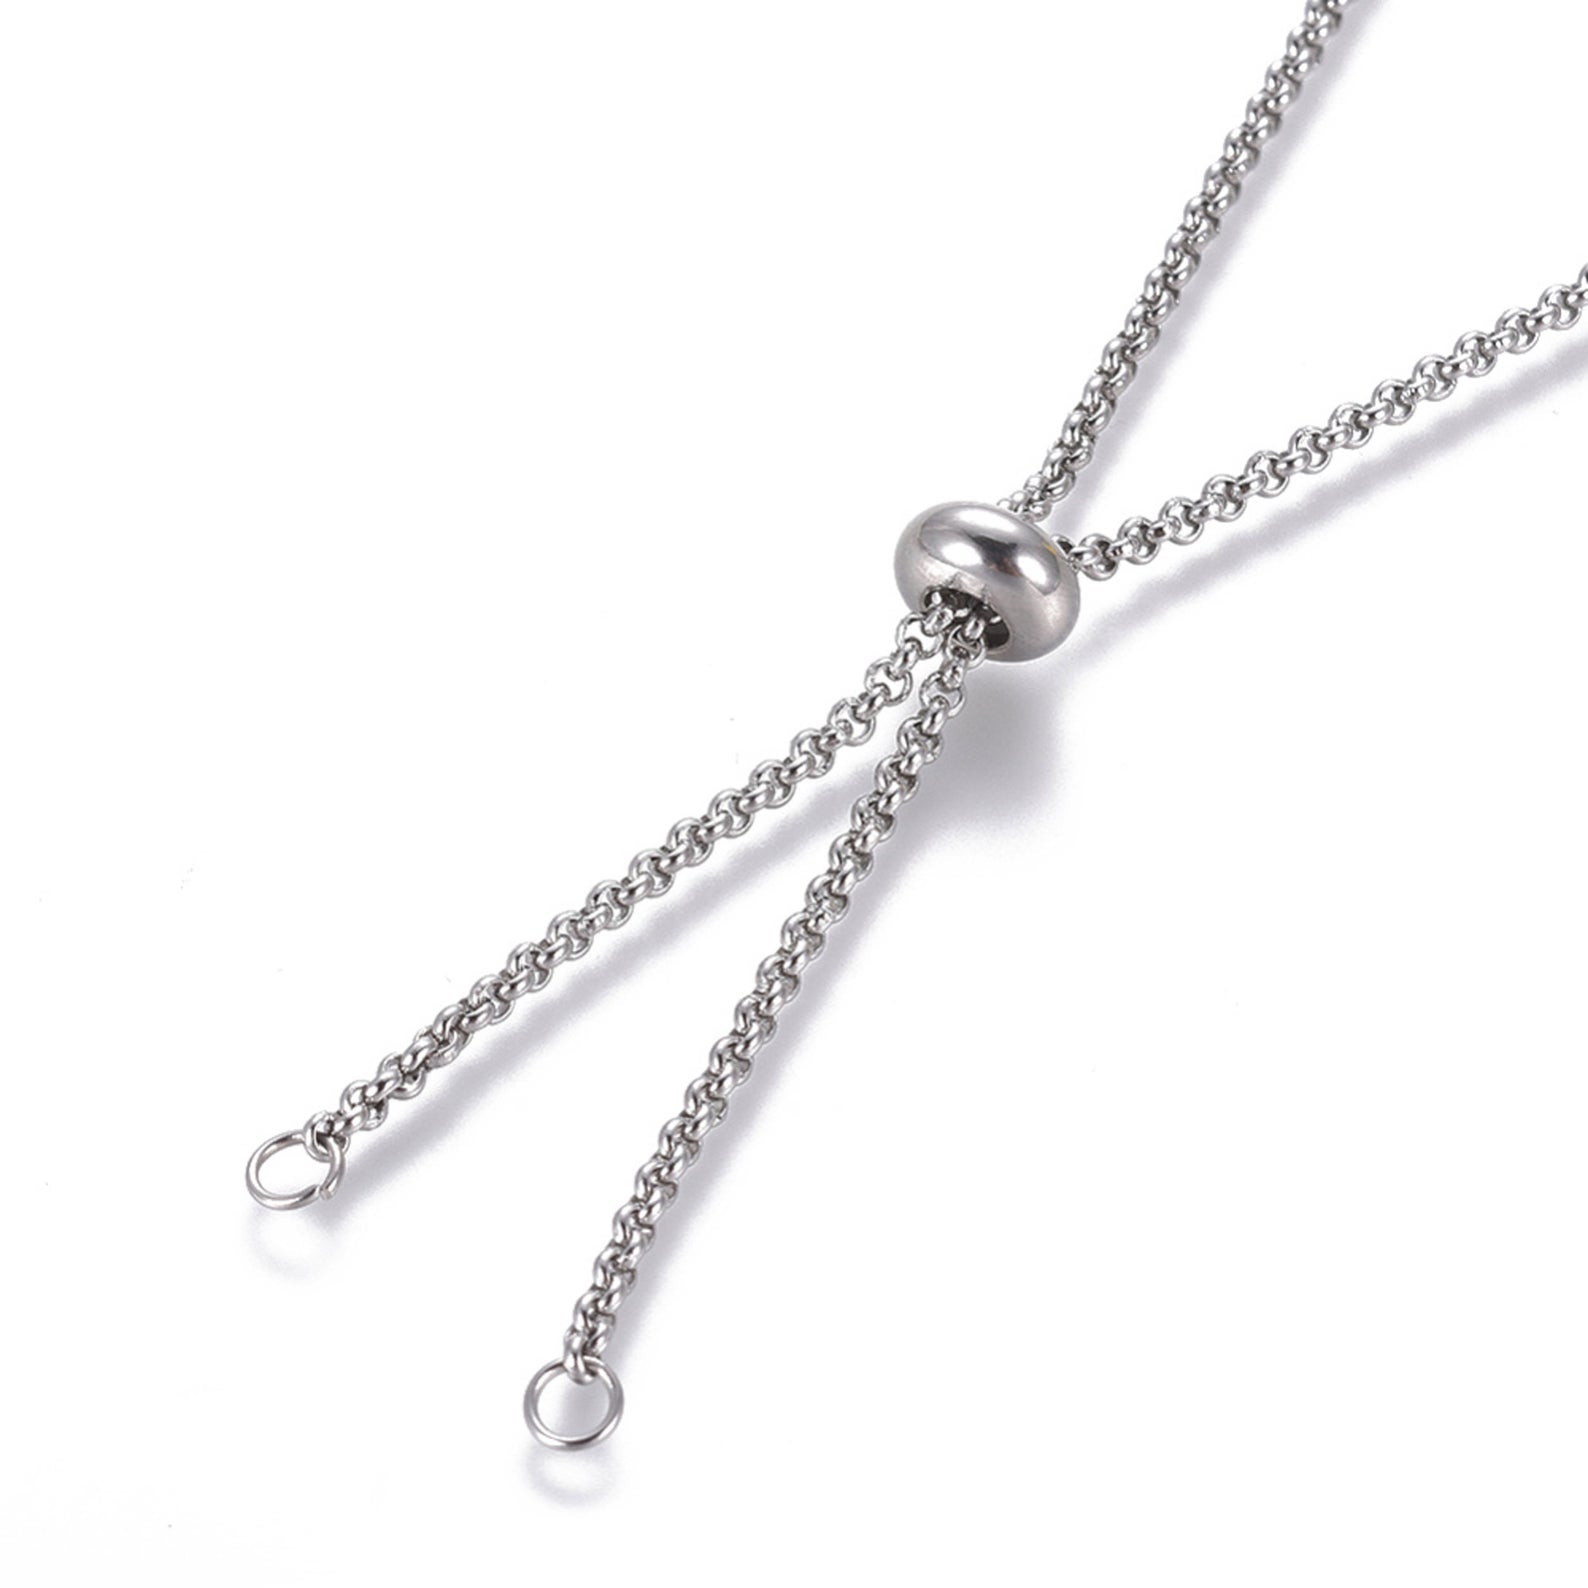 Silver Sliding Adjustable Chain 58cm | The Silver Store